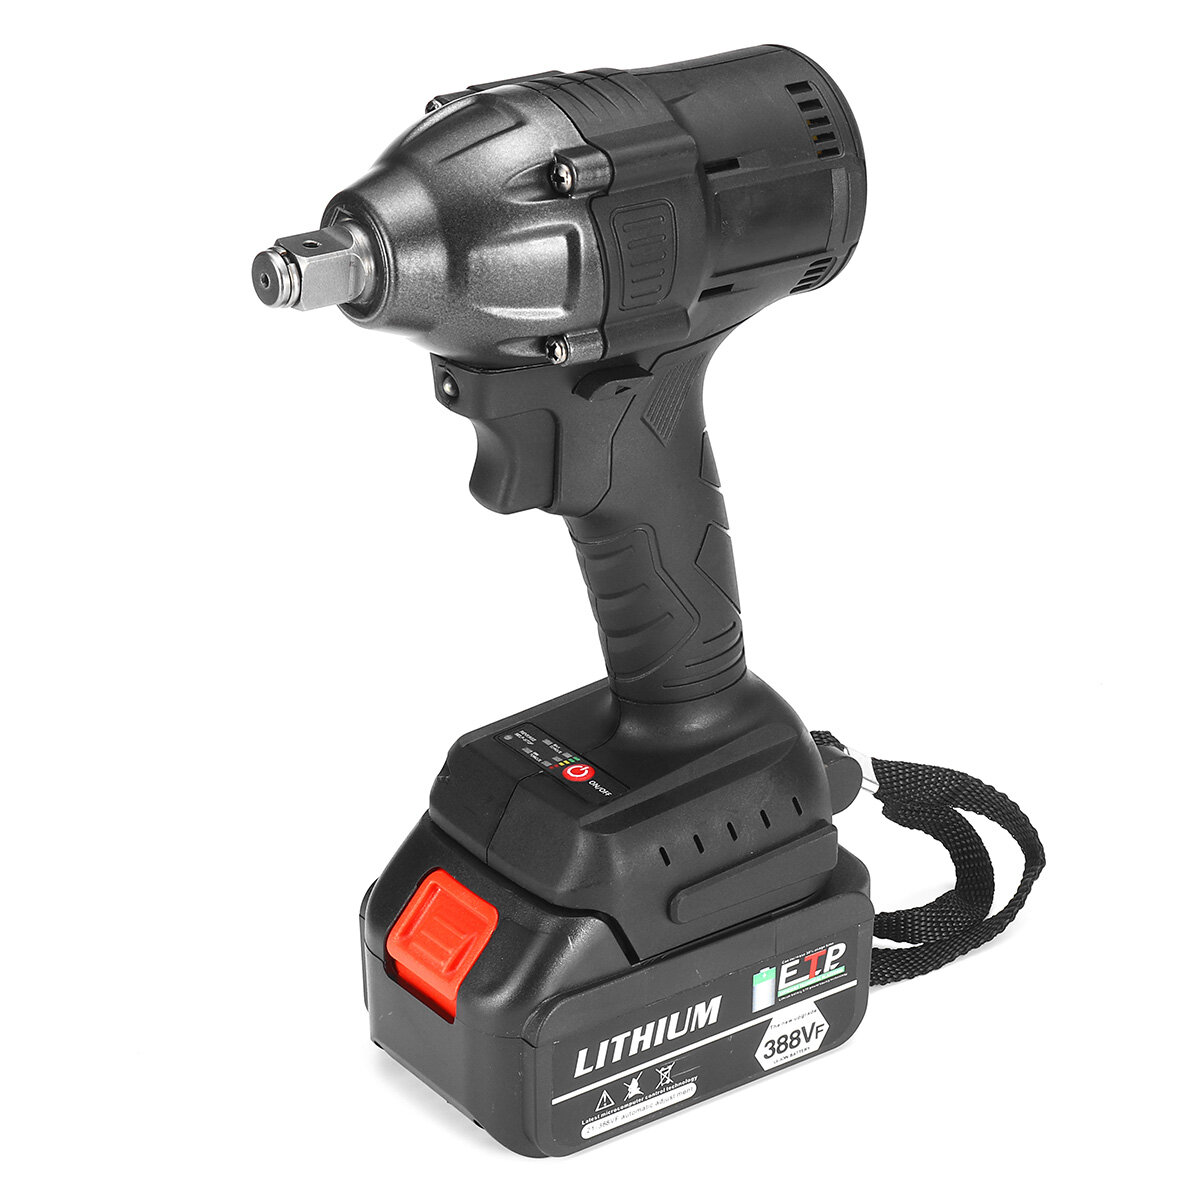 Image of Wolike 388VF 22890mAh Brushless Electric Wrench Cordless Impact Wrench Drill For 18V Makit Battery